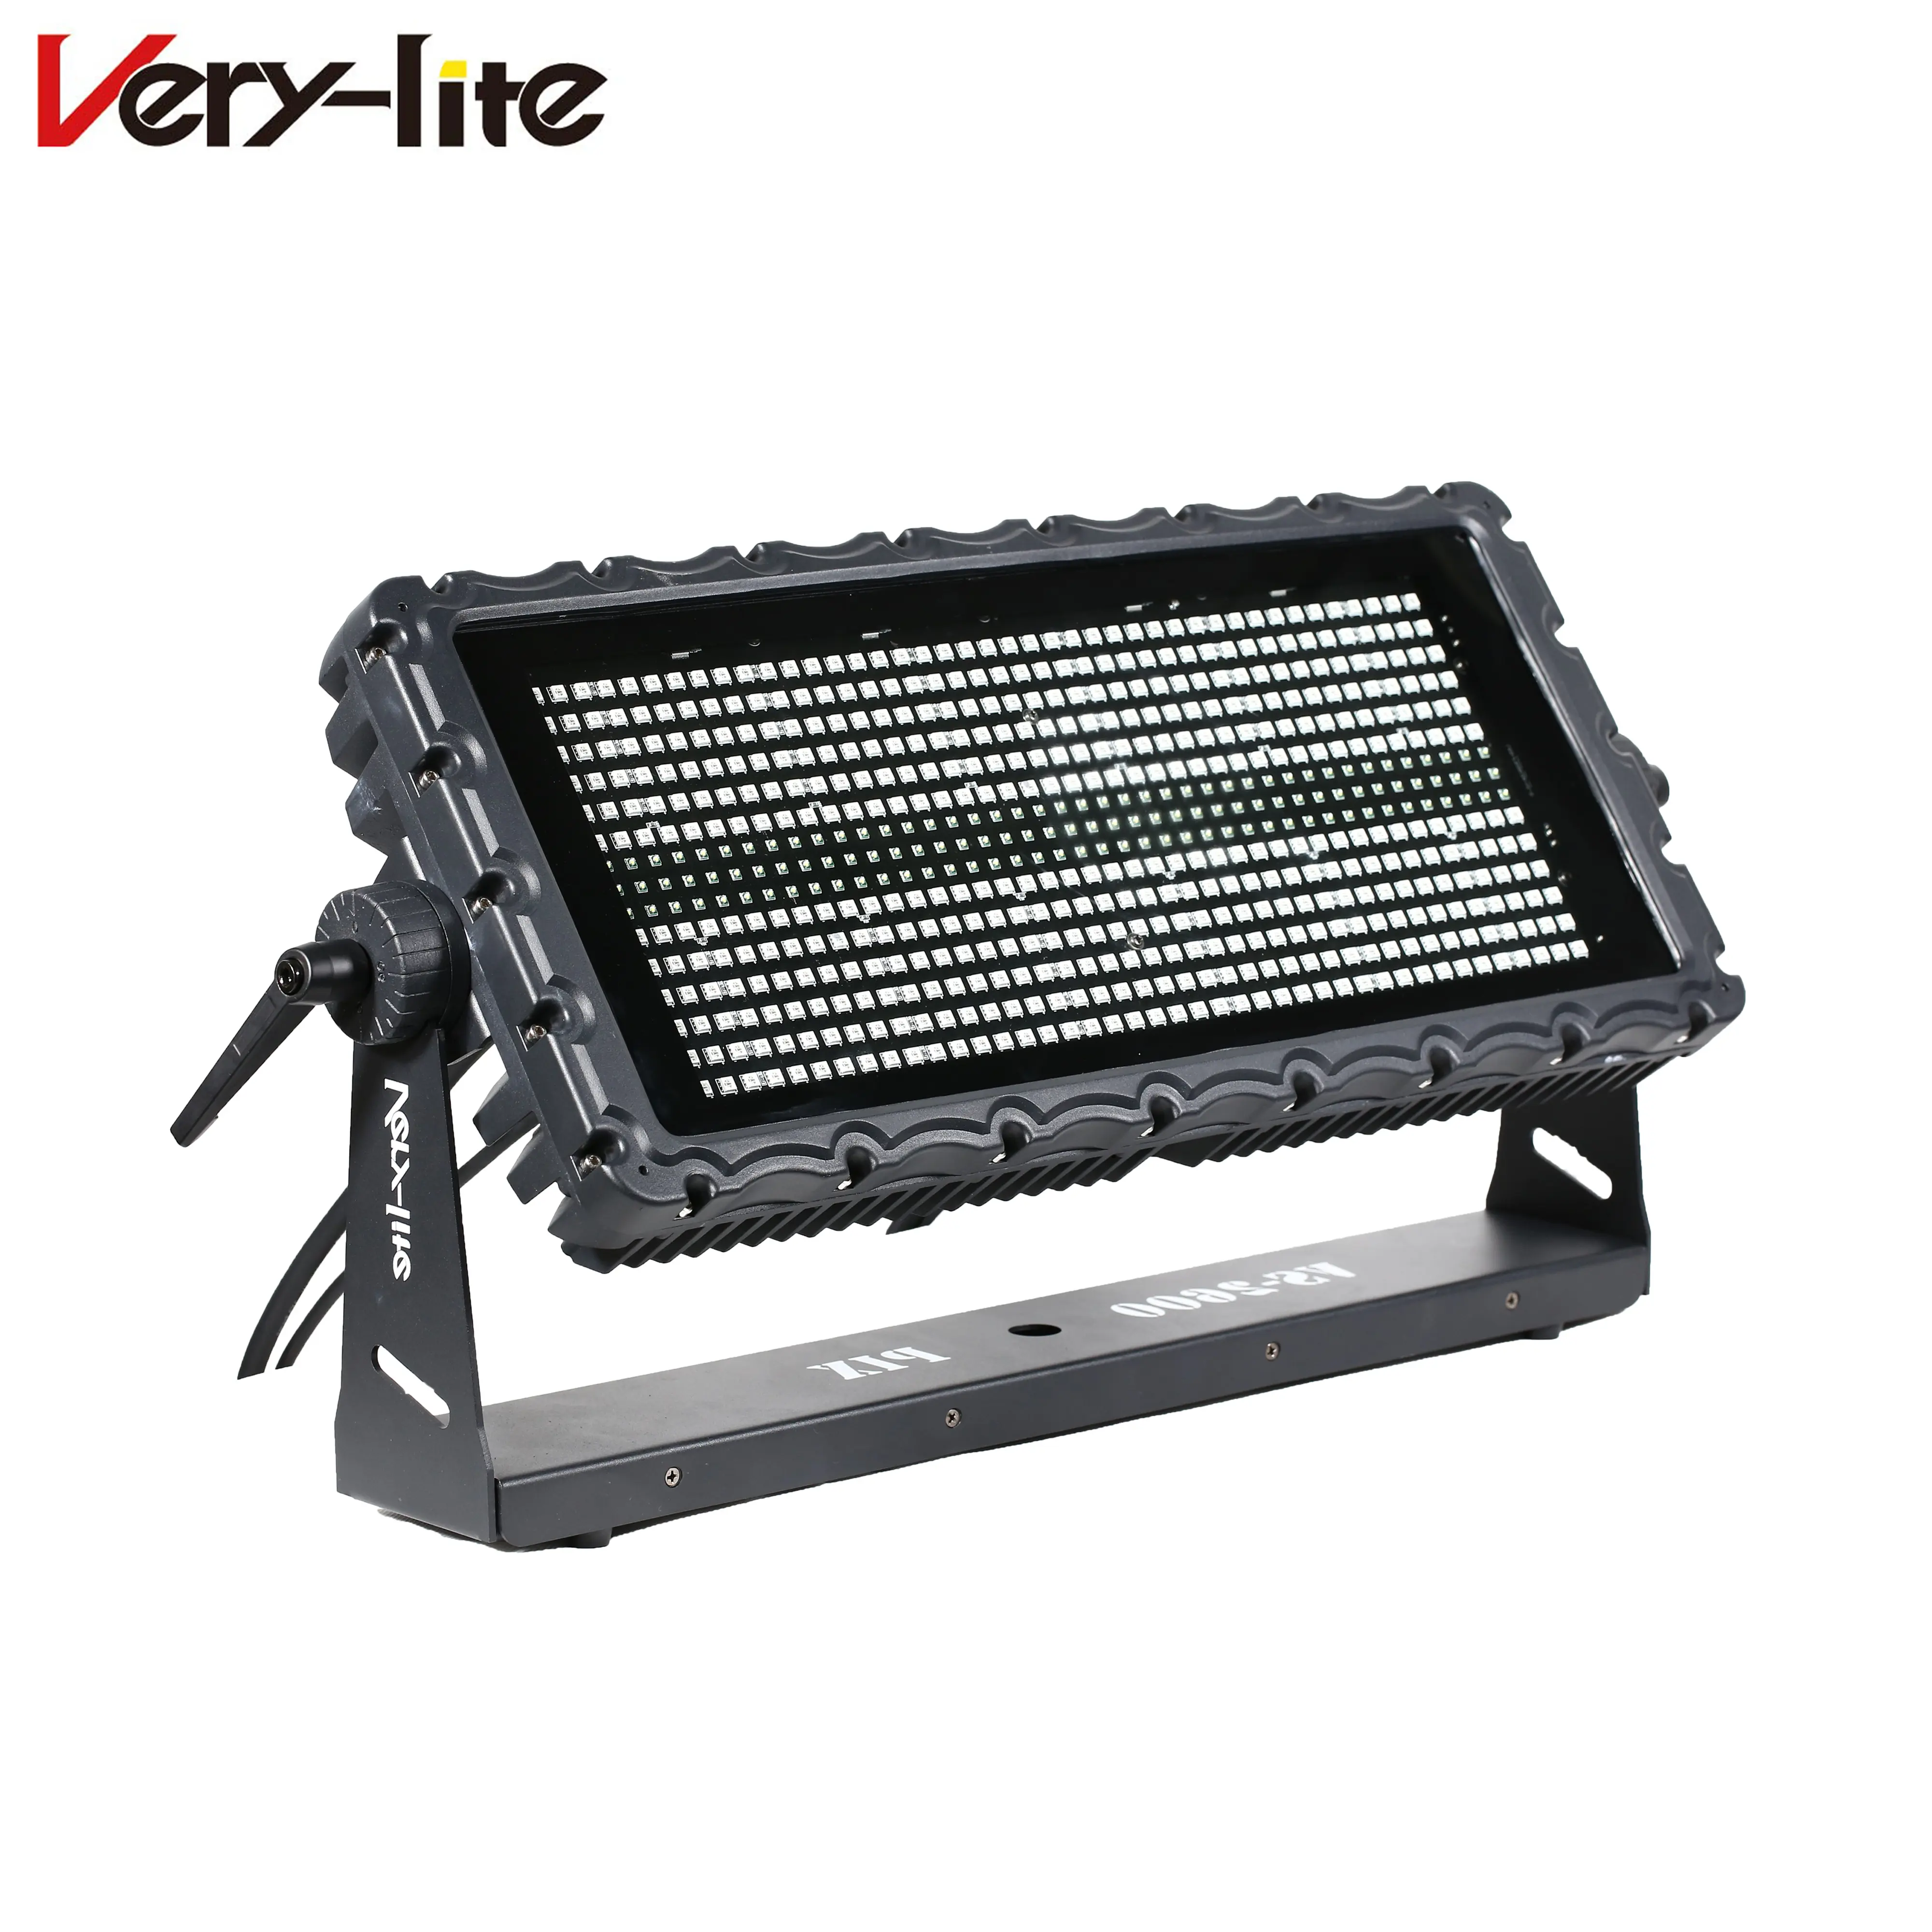 VERY-LITE Outdoor Use Flash led amber strobe light 600W RGB 3in1 Full color warm white cool white Led strobe stick